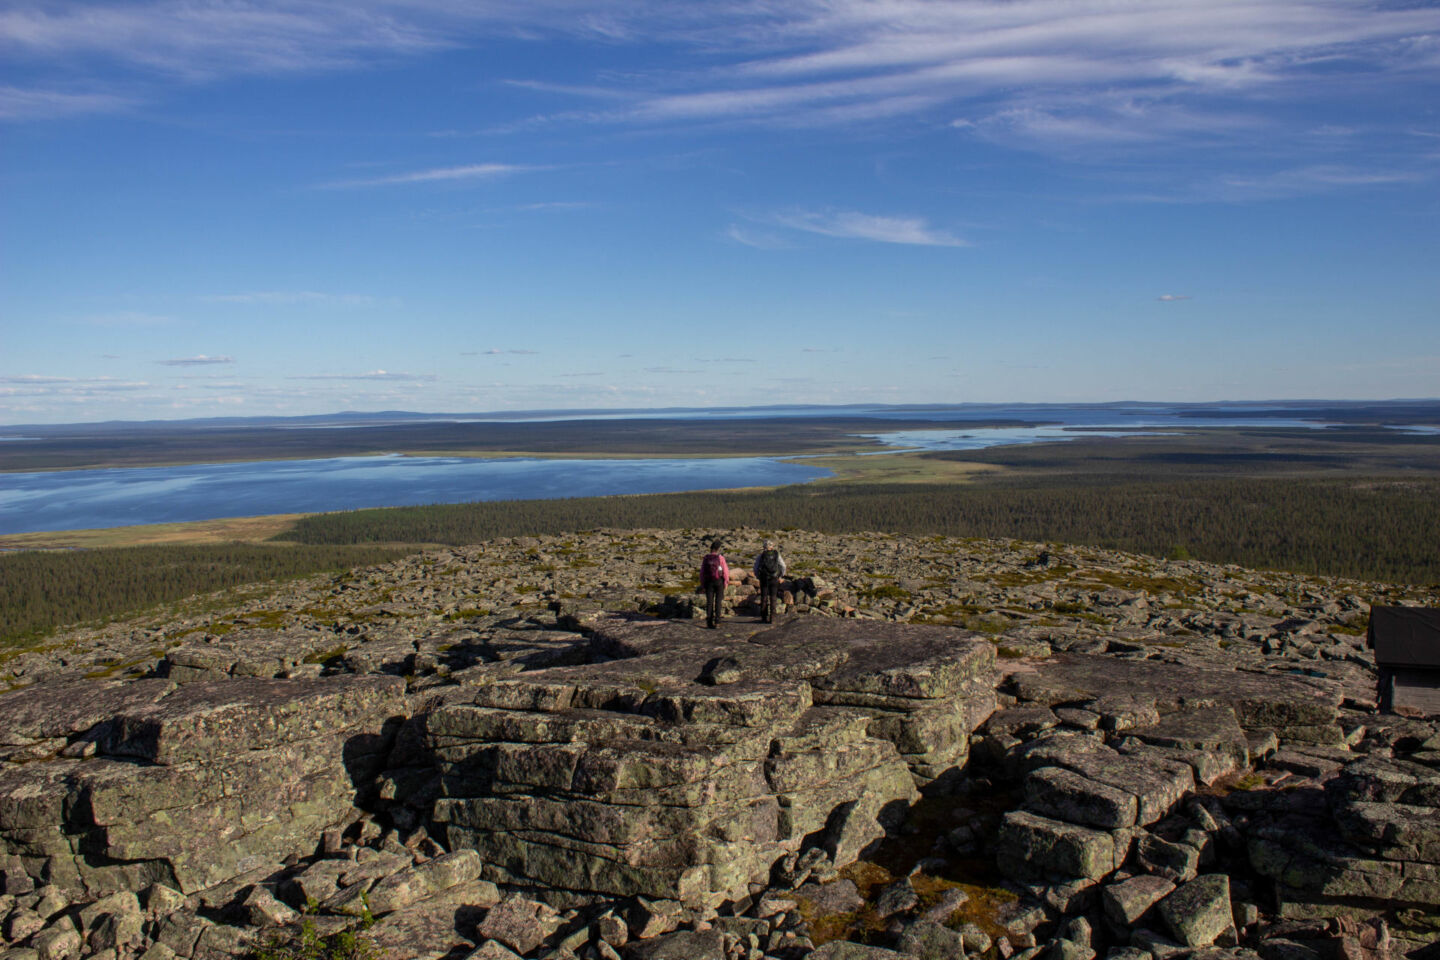 The view from the stone fields in Nattanen (Sodankylä), a Lapland filming location